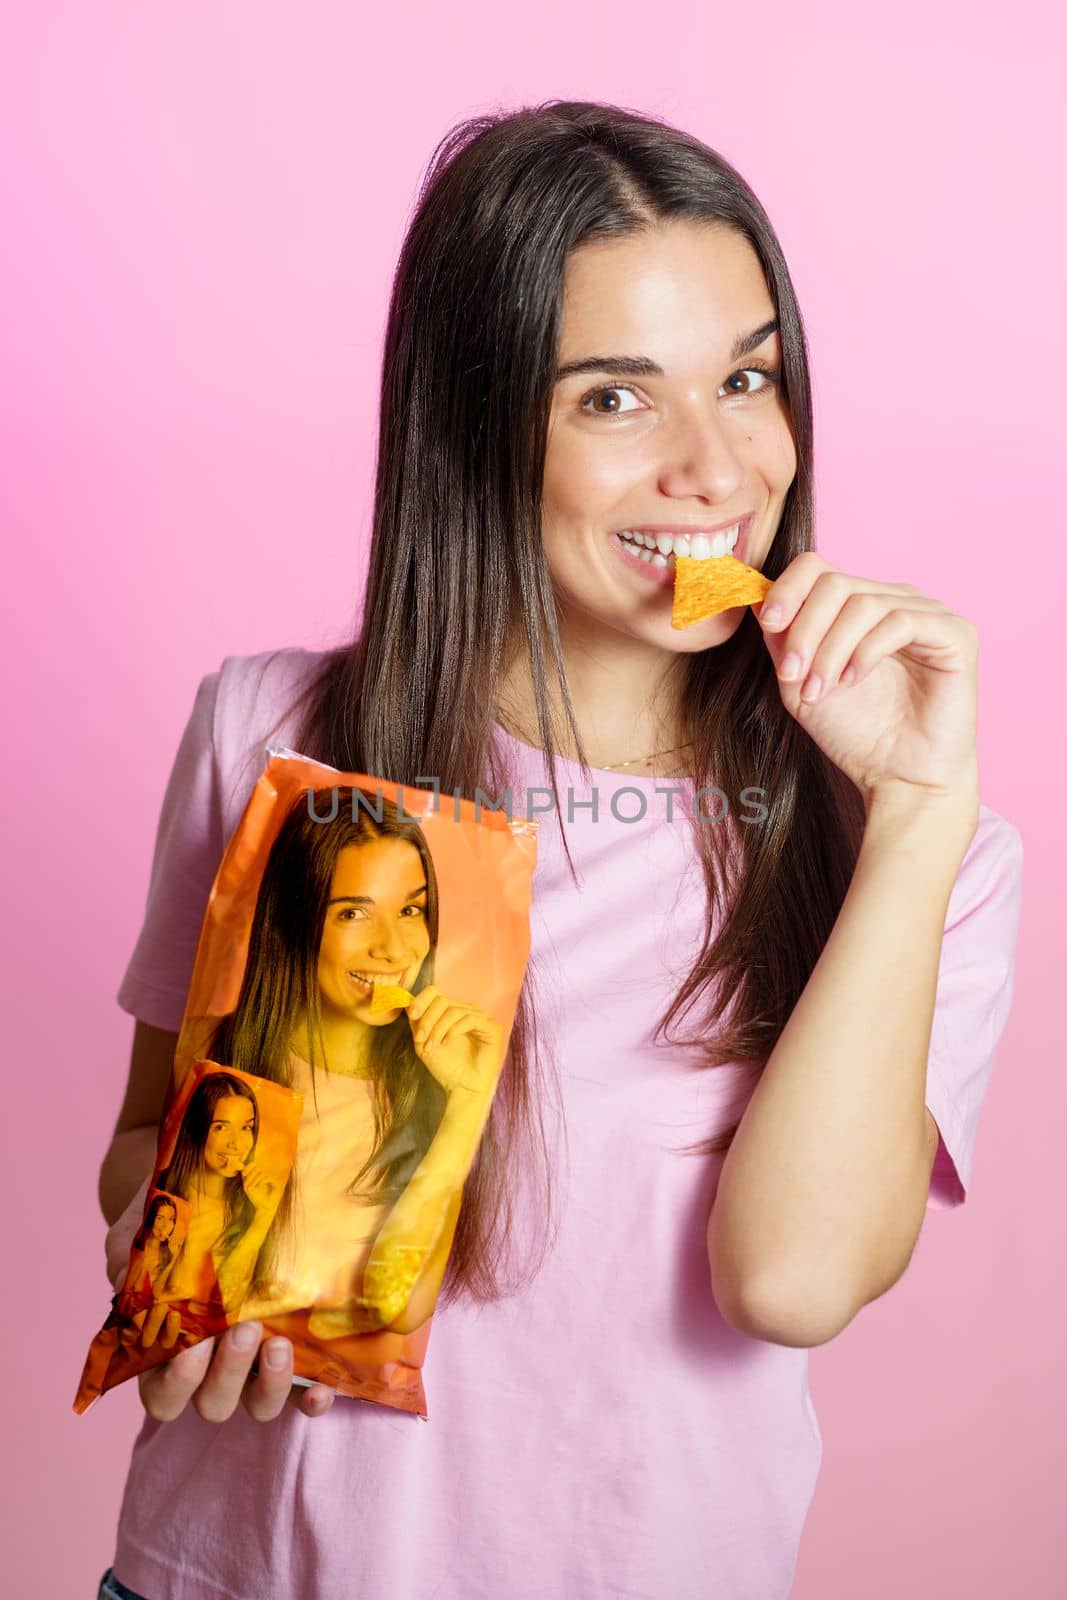 Young happy woman with long dark hair standing on pink background and biting delicious potato chip while holding package with own photos